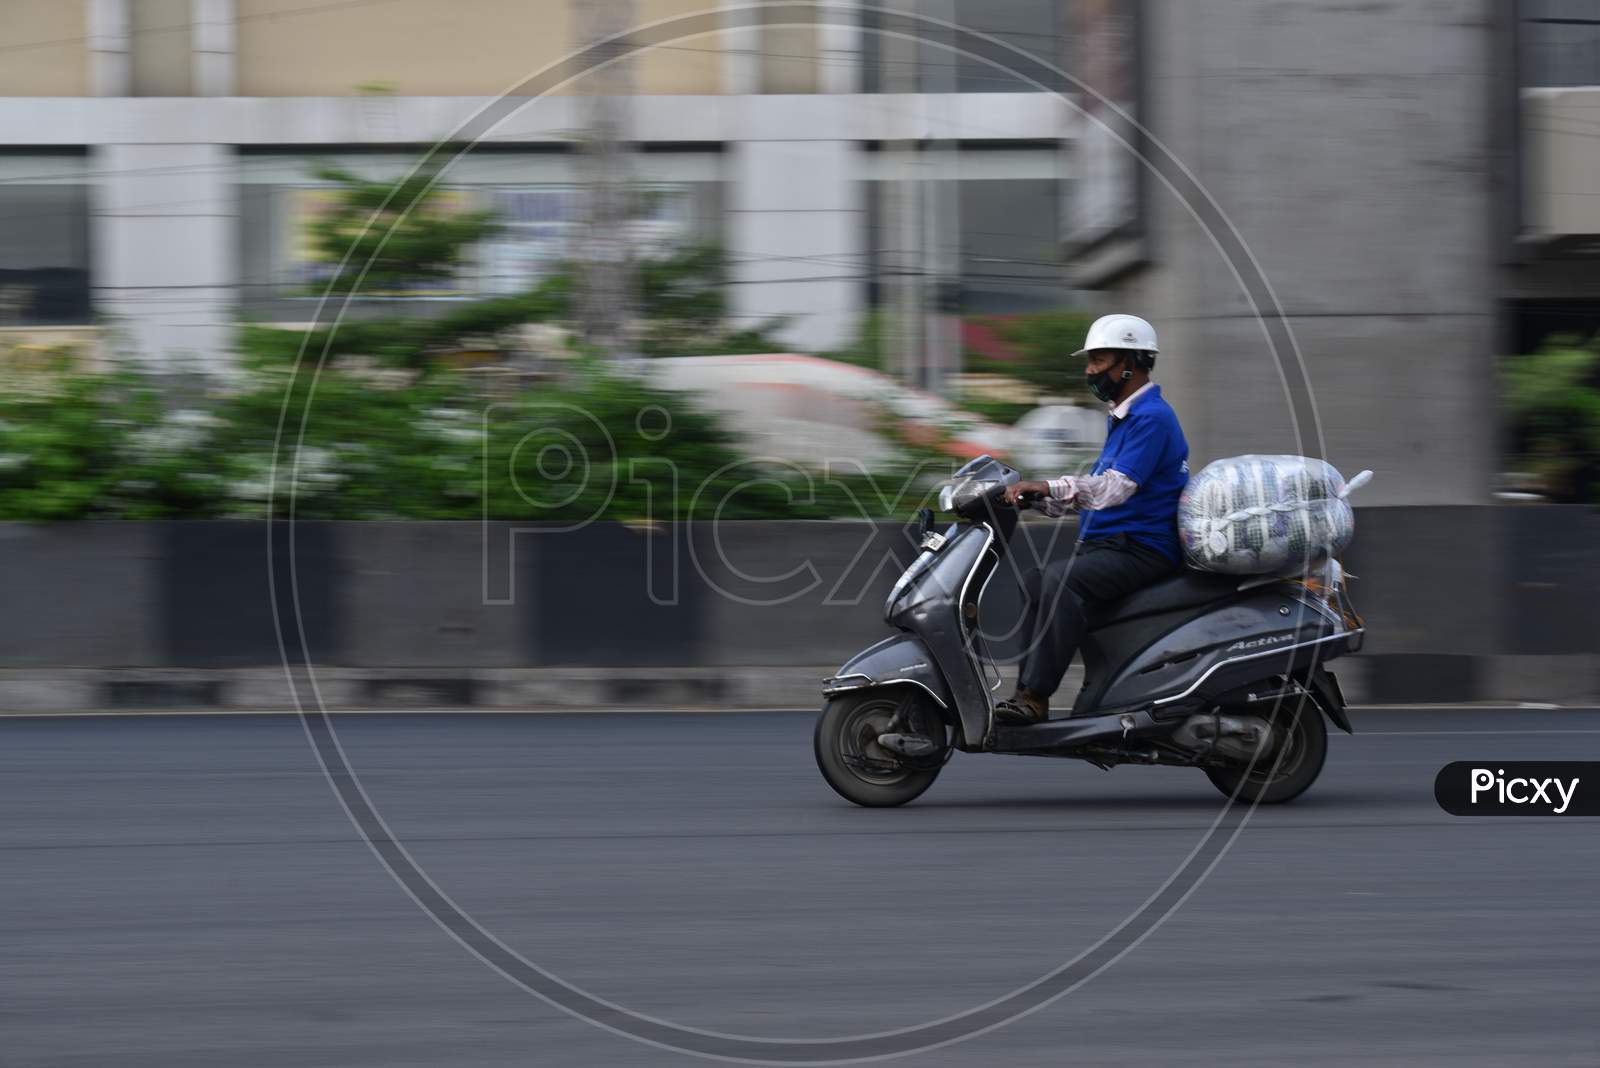 a man delivers essential groceries on his bike during nationwide lockdown amid coronavirus pandemic, April 8,2020, Hyderabad.